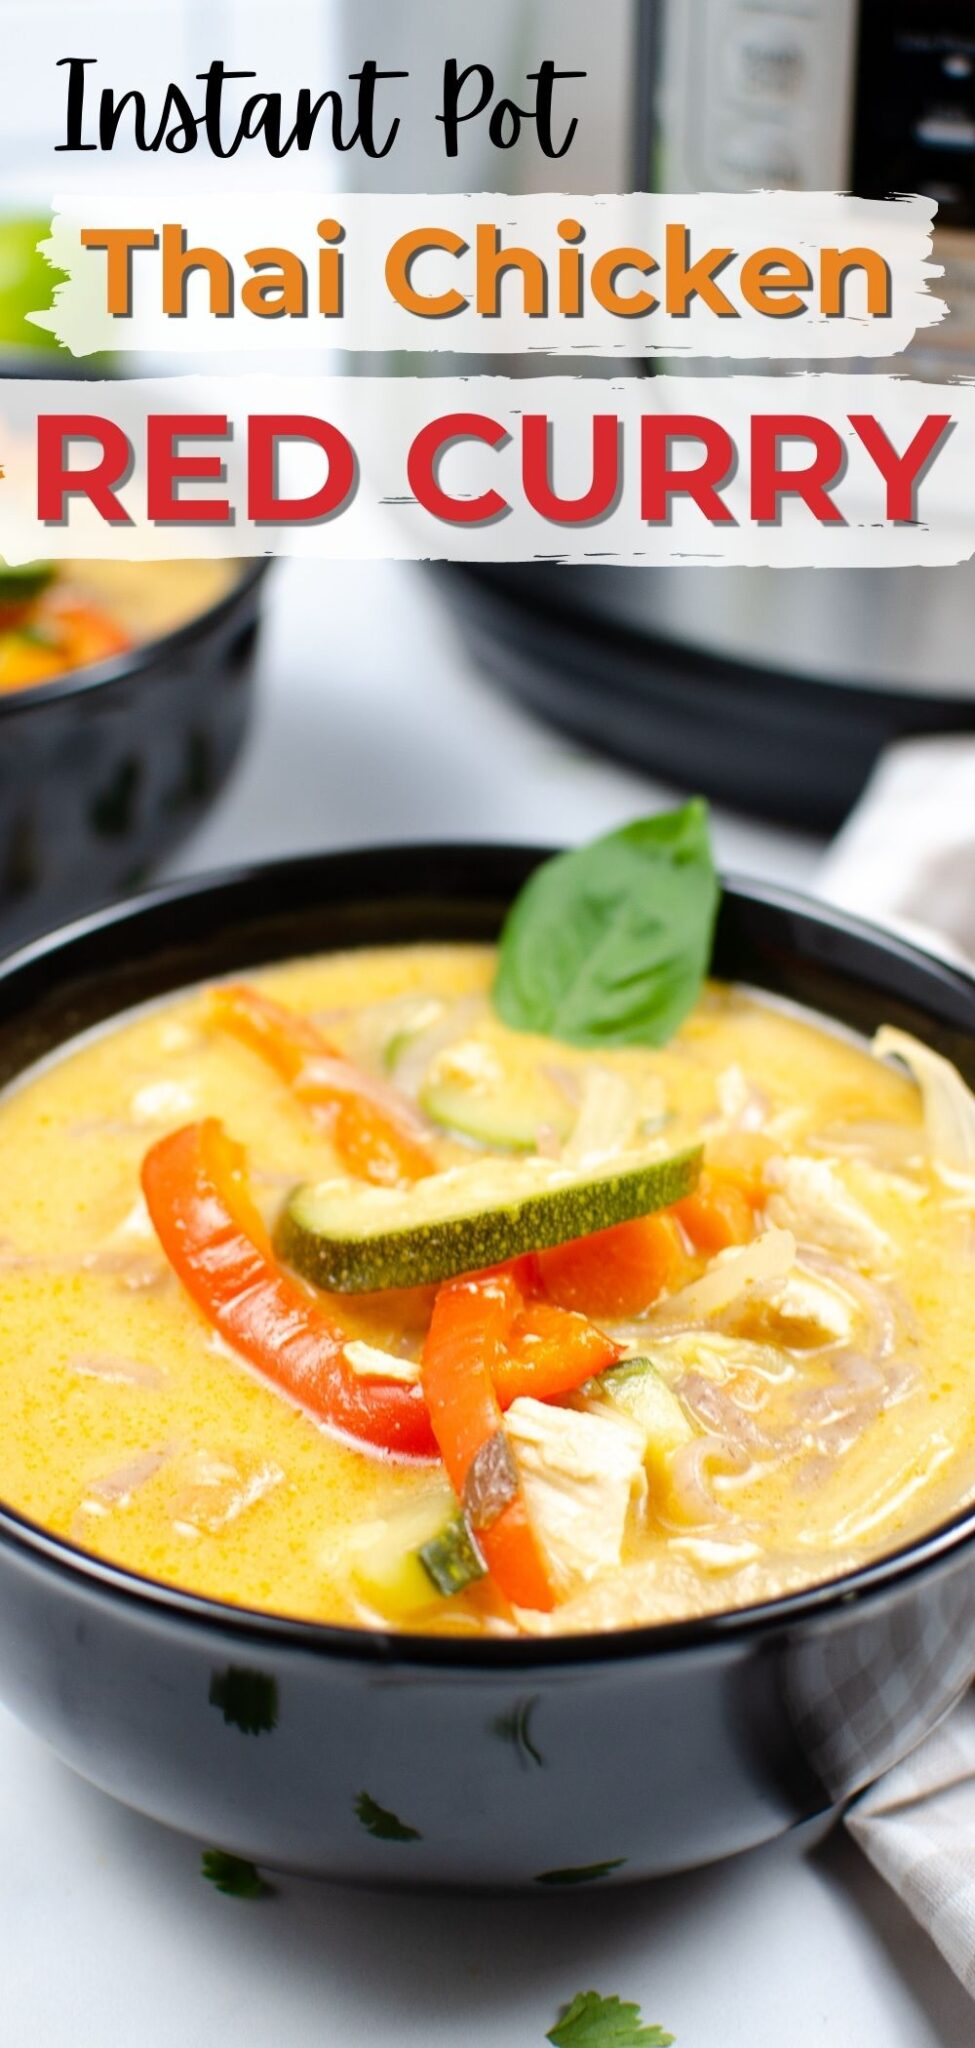 This instant pot Thai chicken curry is rich, flavorful, and fragrant. Just 30 minutes in an instant pot gives you the perfect spicy weeknight dinner! #thaichickencurry #chickencurry #thaifood #chicken #instantpot via @wondermomwannab